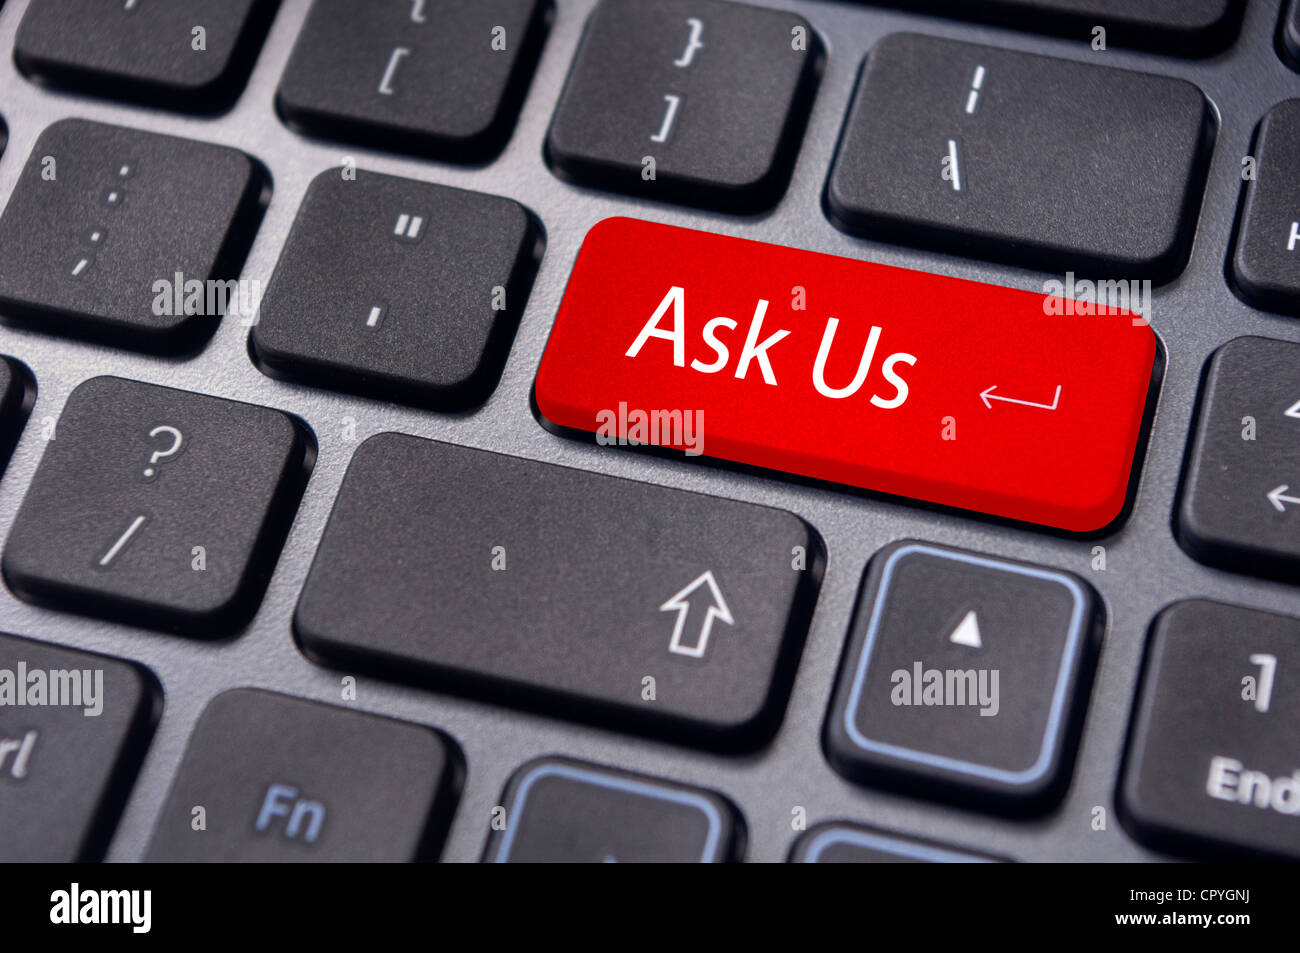 a message on keyboard enter key for 'ask us' concepts. Stock Photo